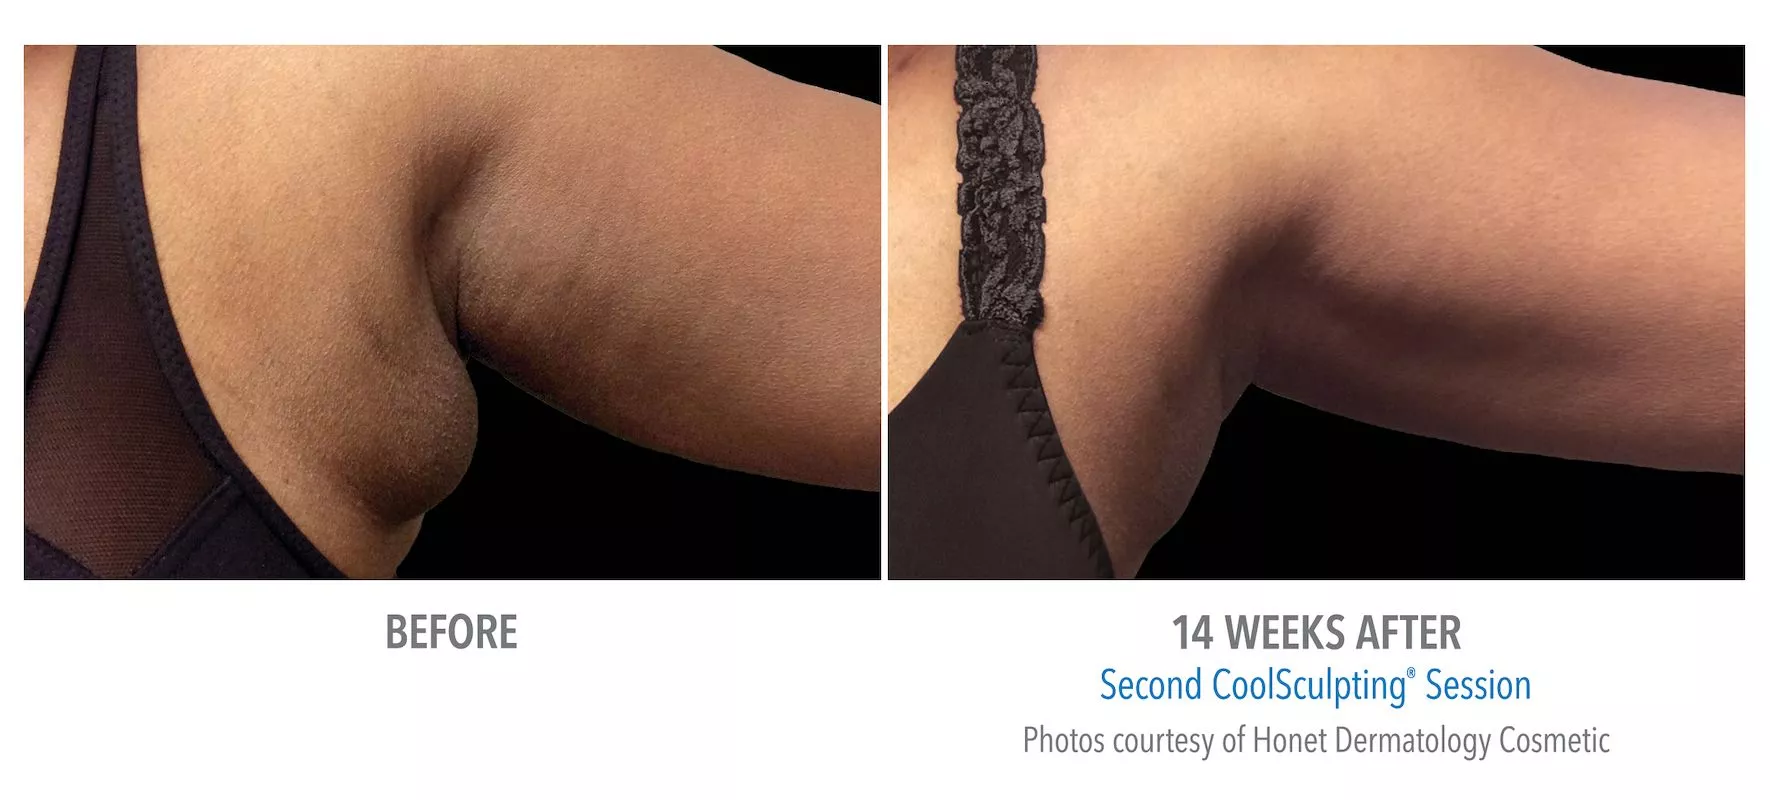 Female CoolSculpting patient in Las Vegas. Before and after photo of arms post CoolSculpting treatment.